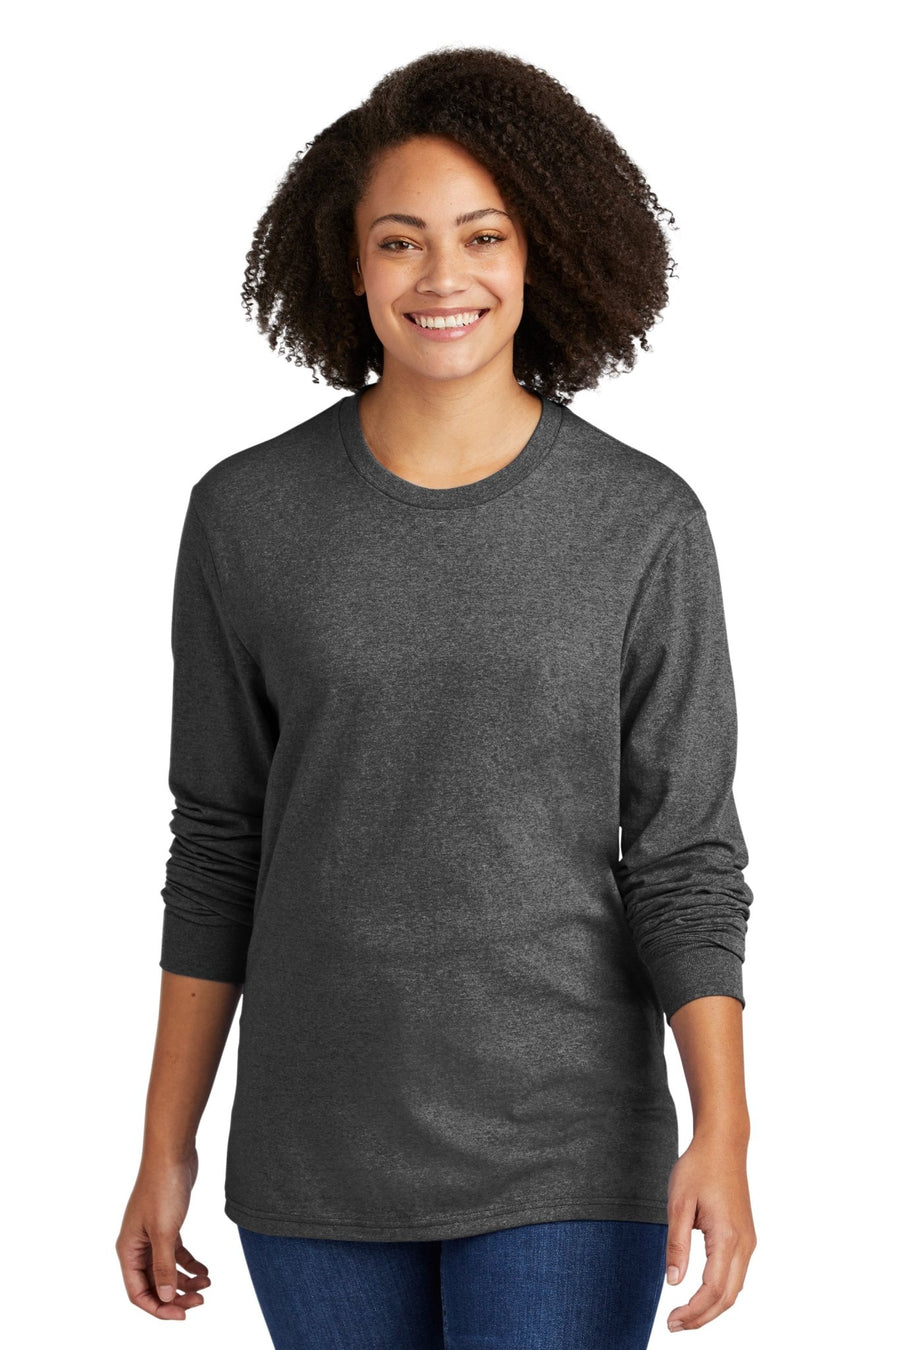 Unisex Long Sleeve Recycled Blend Tee - Allmade